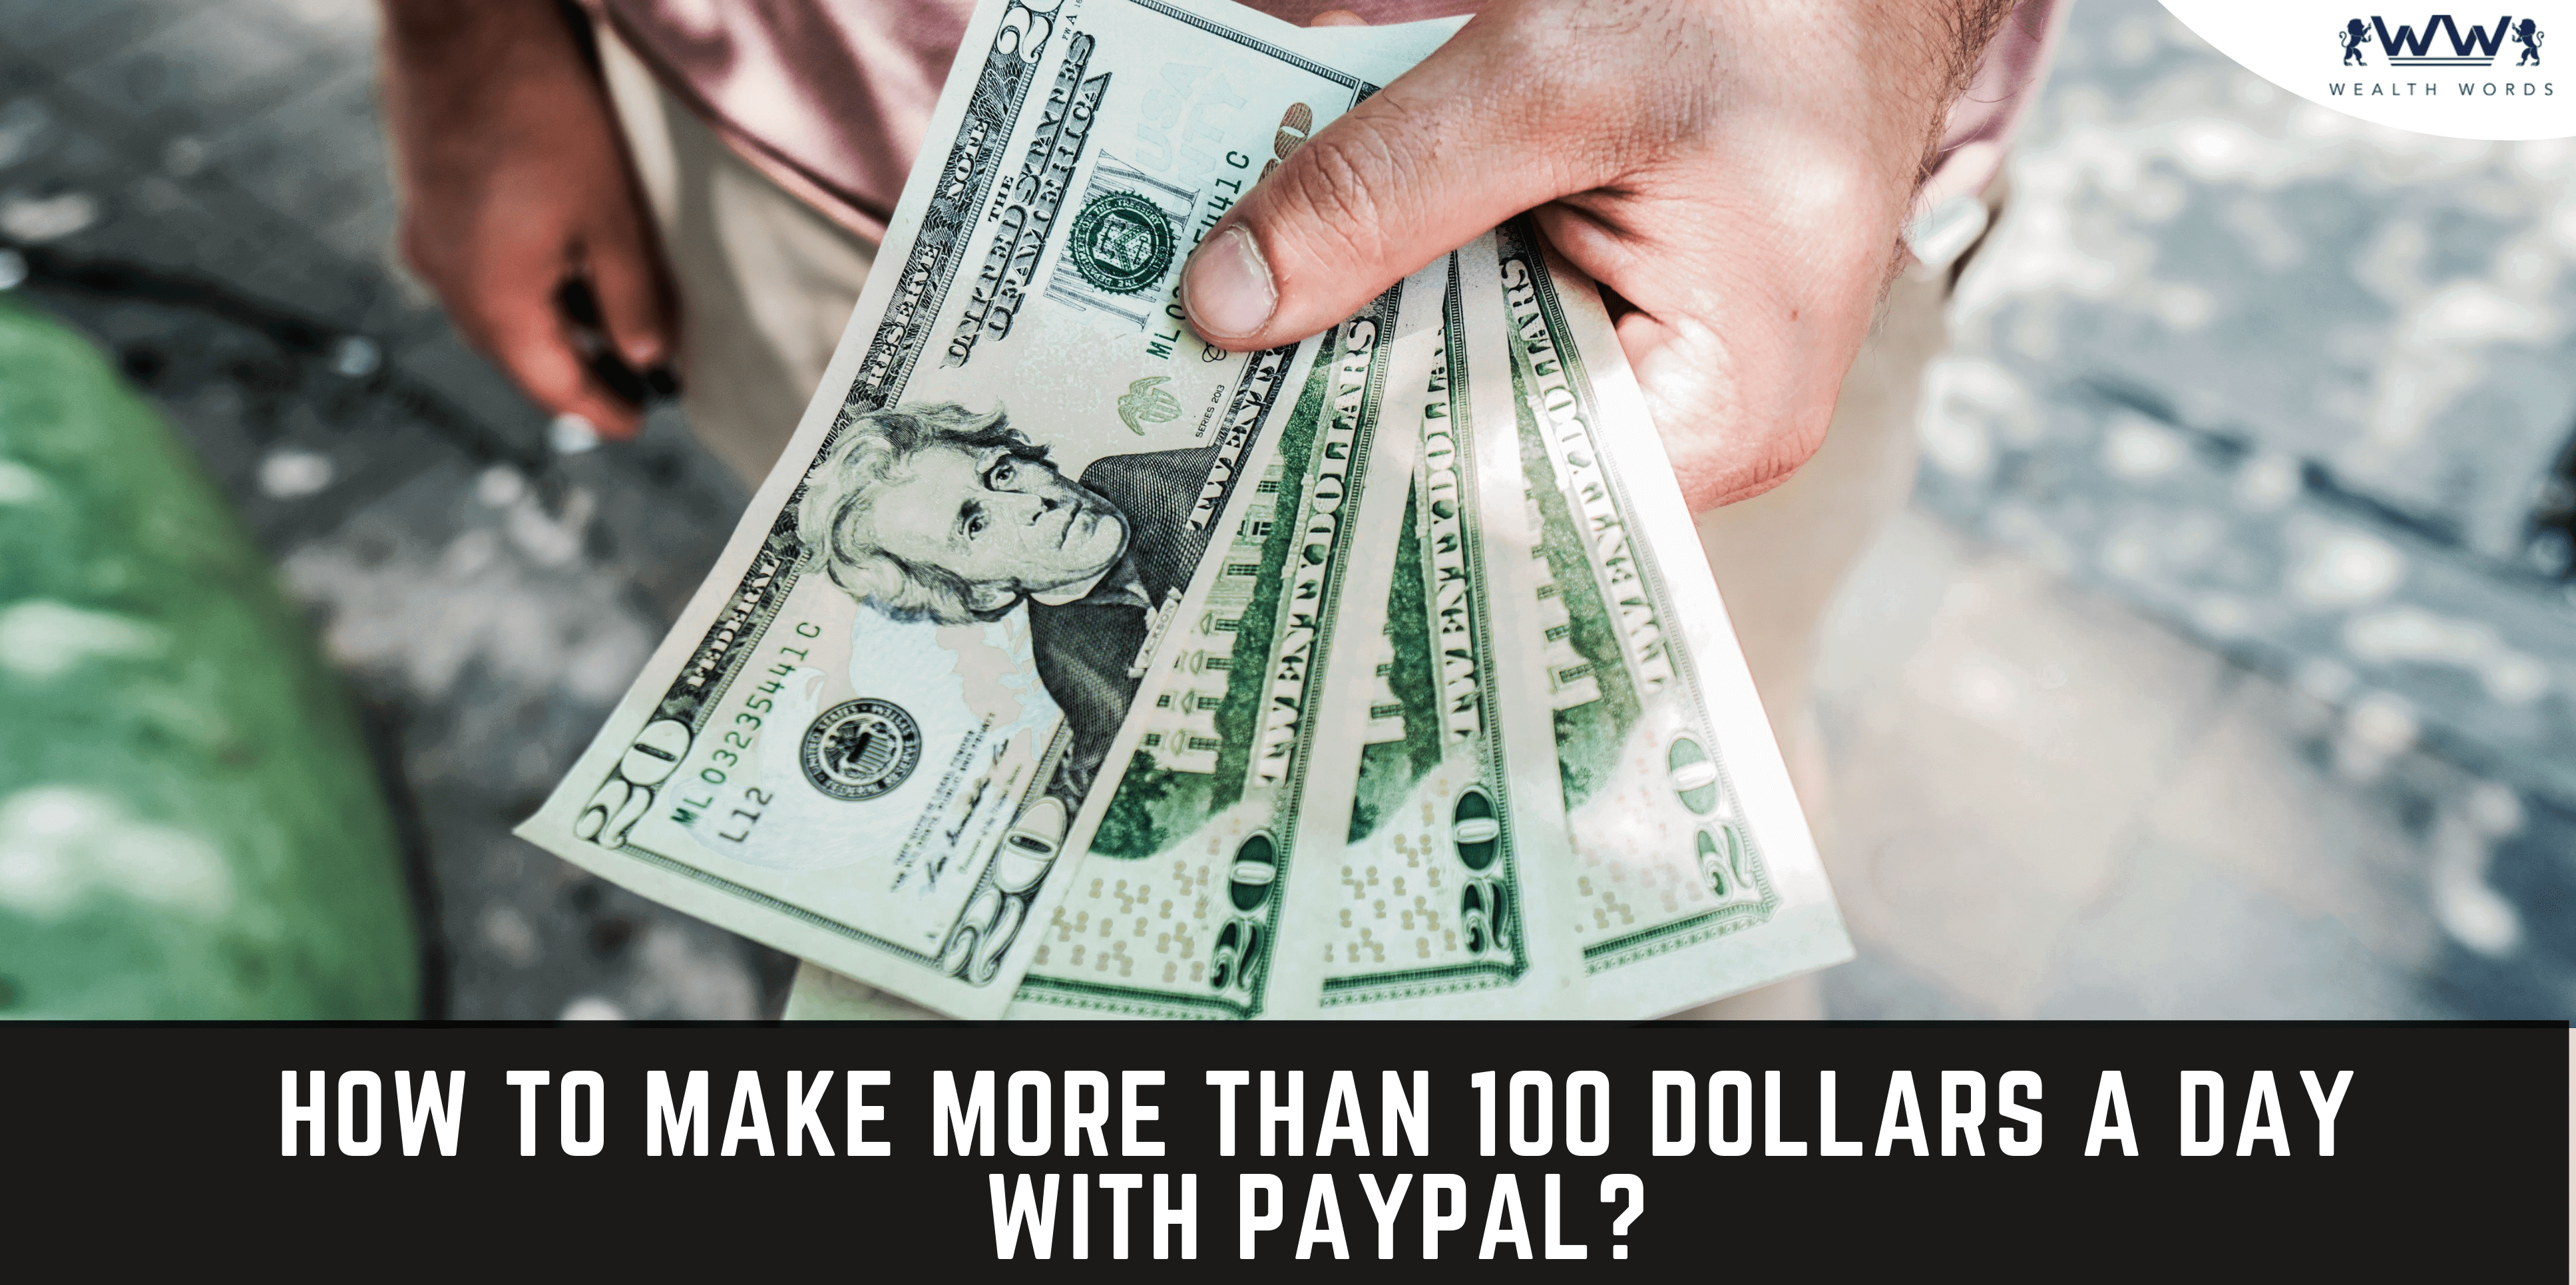 Play Games And Earn Paypal Money